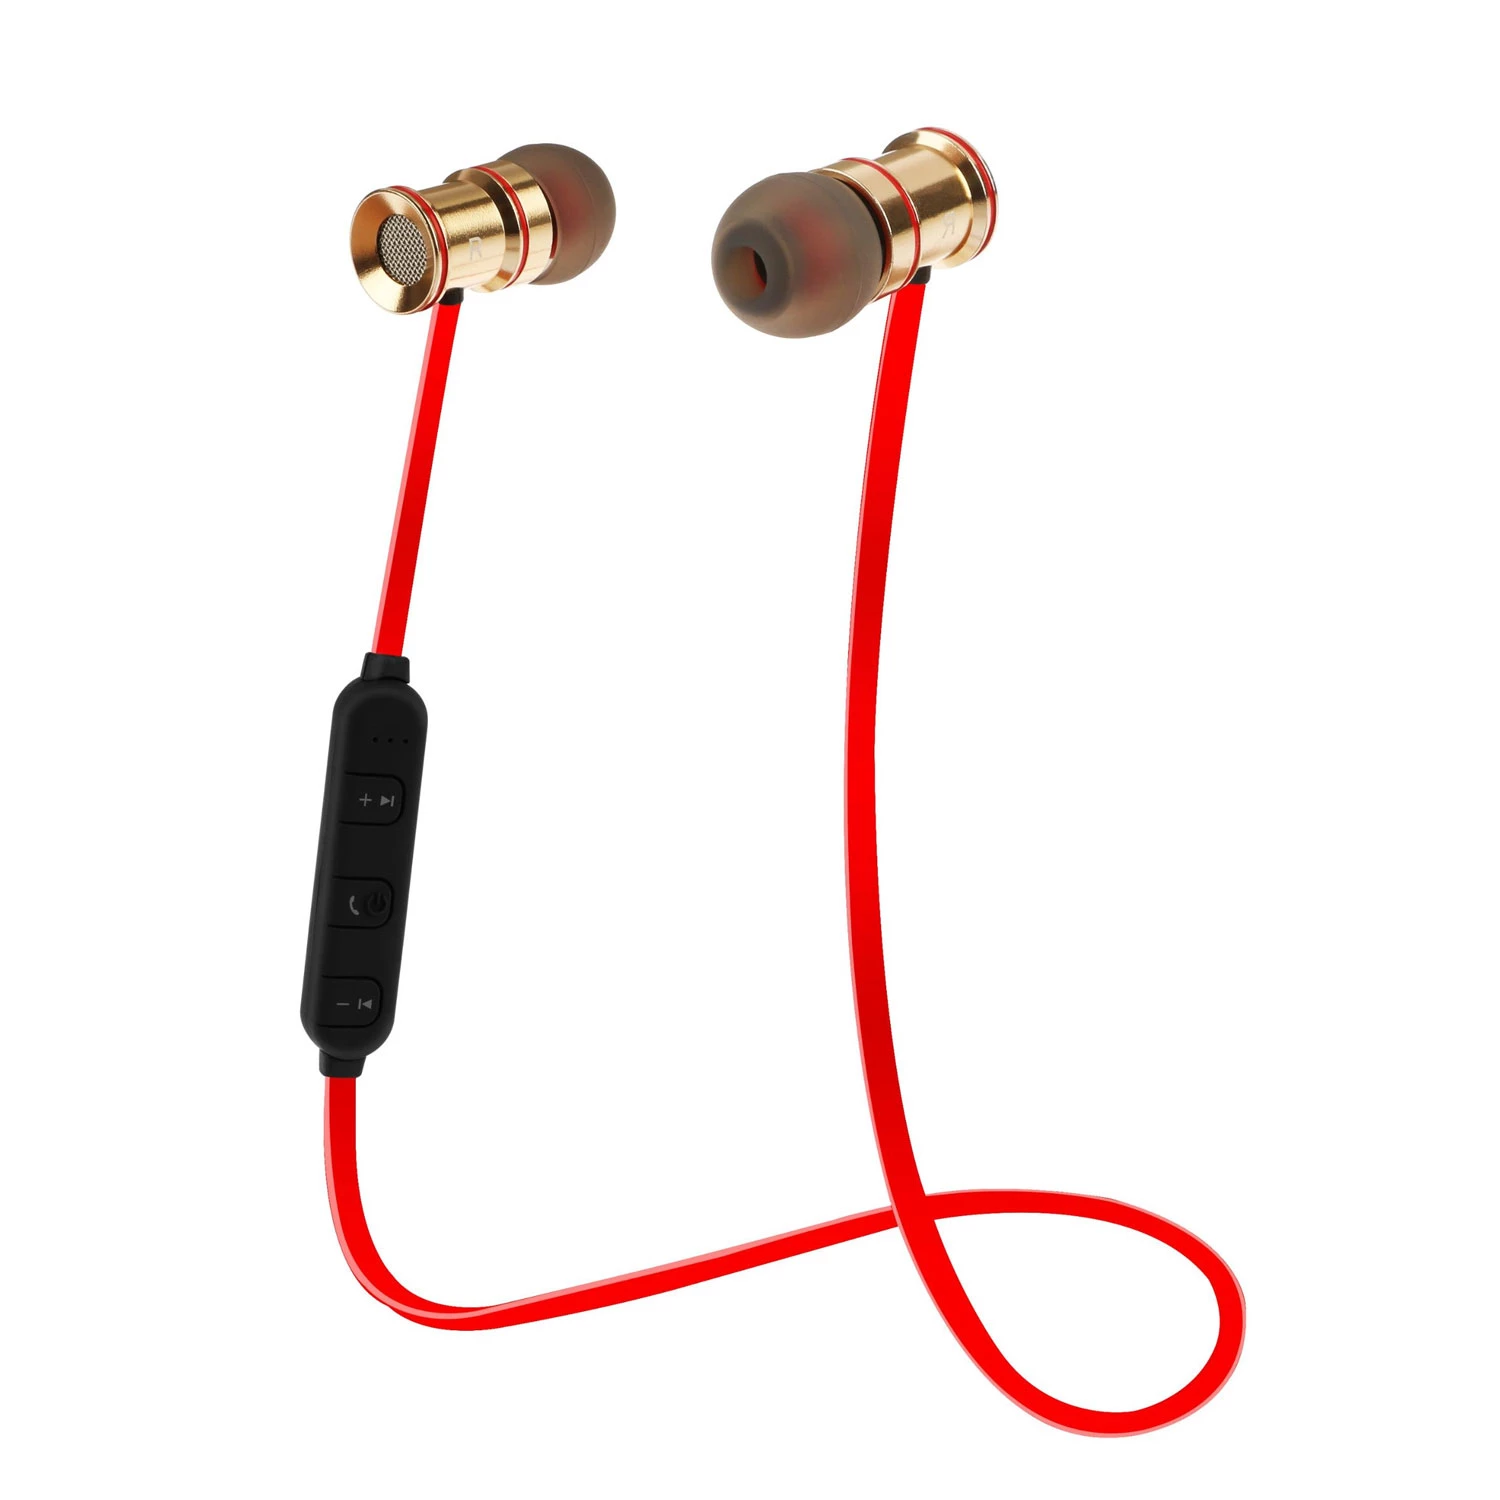 Wireless Sport Headset V4.1 - Sweat-proof In-Ear Stereo Earphones with Mic - Hands-free - Packs & Pi